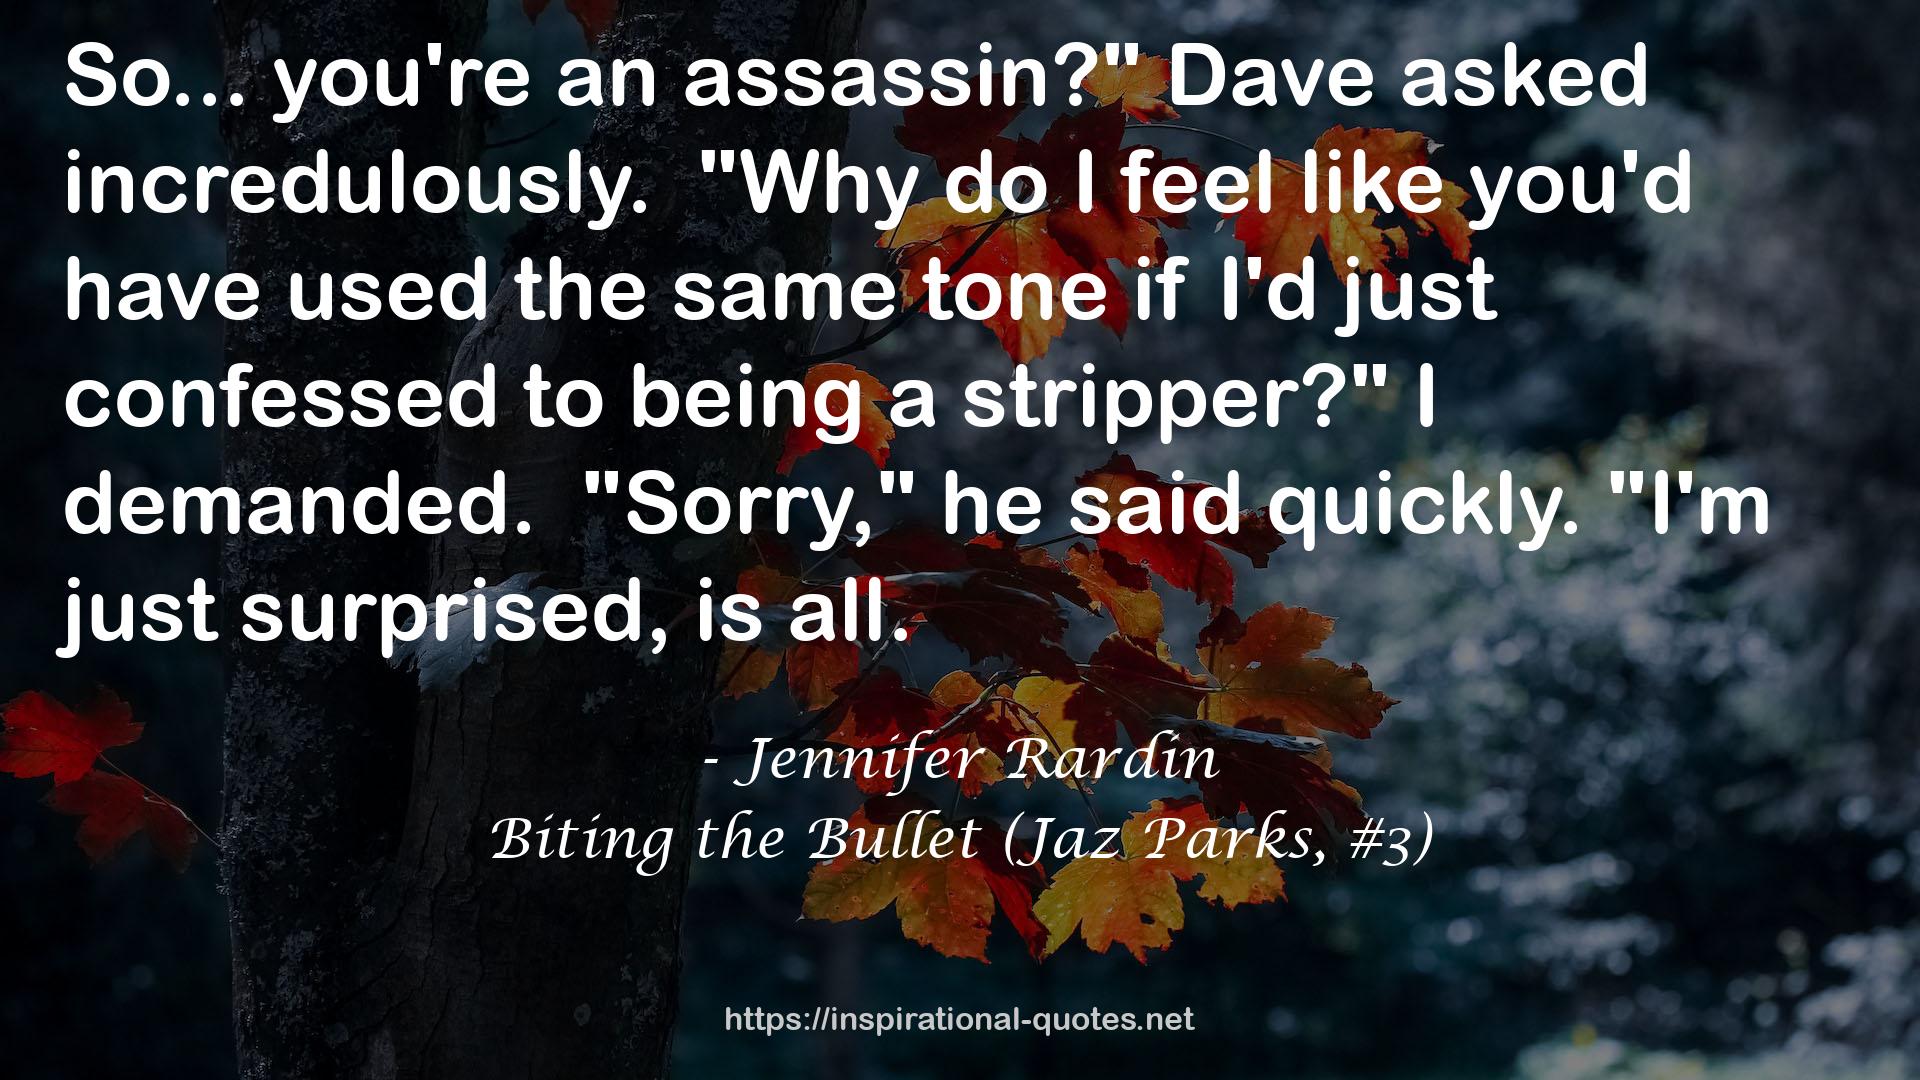 Biting the Bullet (Jaz Parks, #3) QUOTES